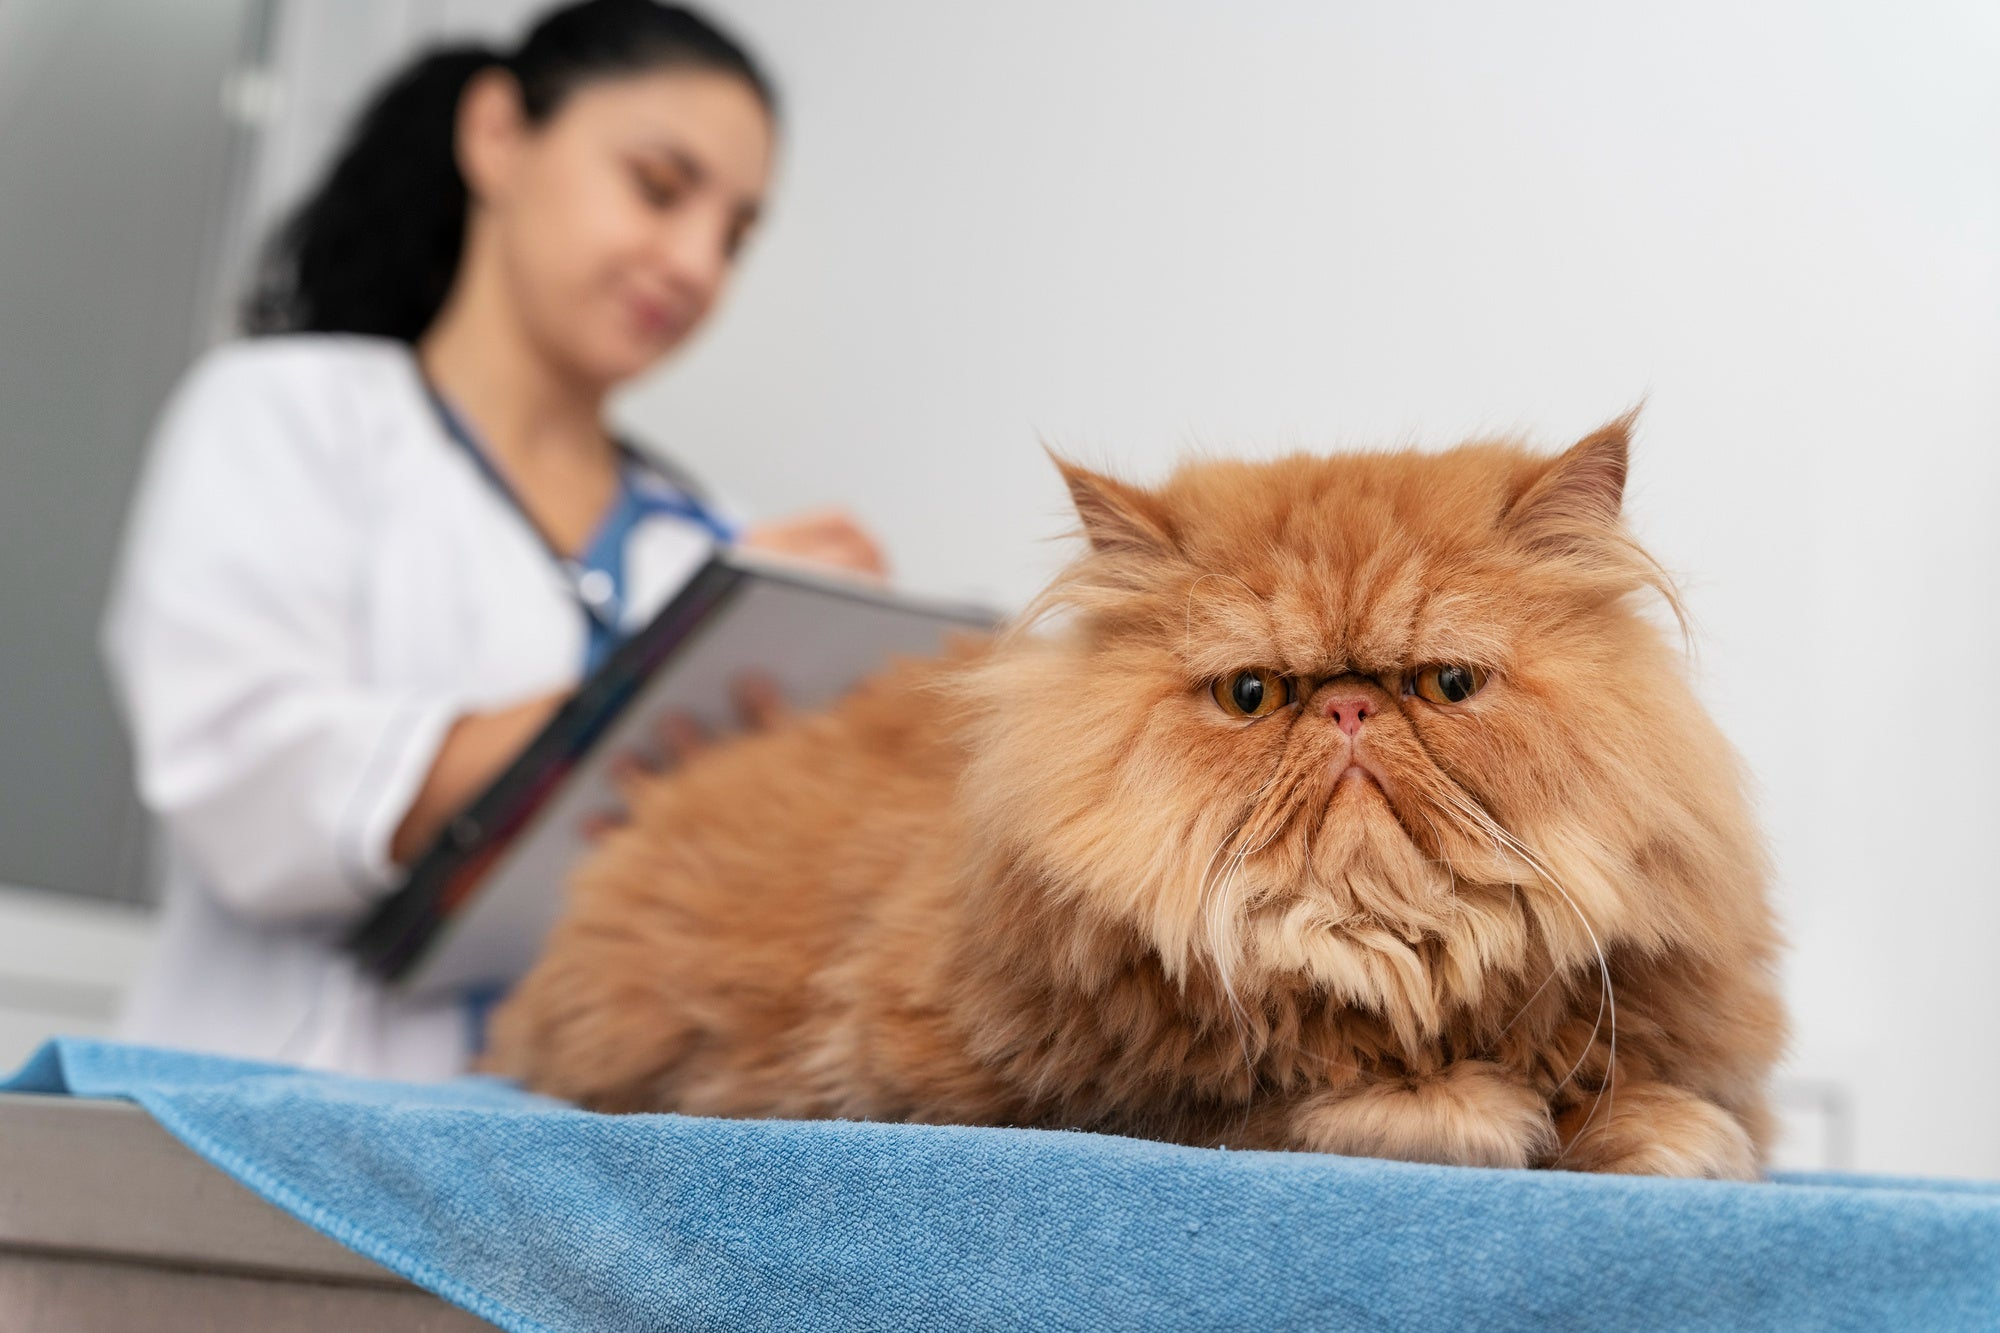 Kittens for Sale: Understanding Health Certifications and What They Mean